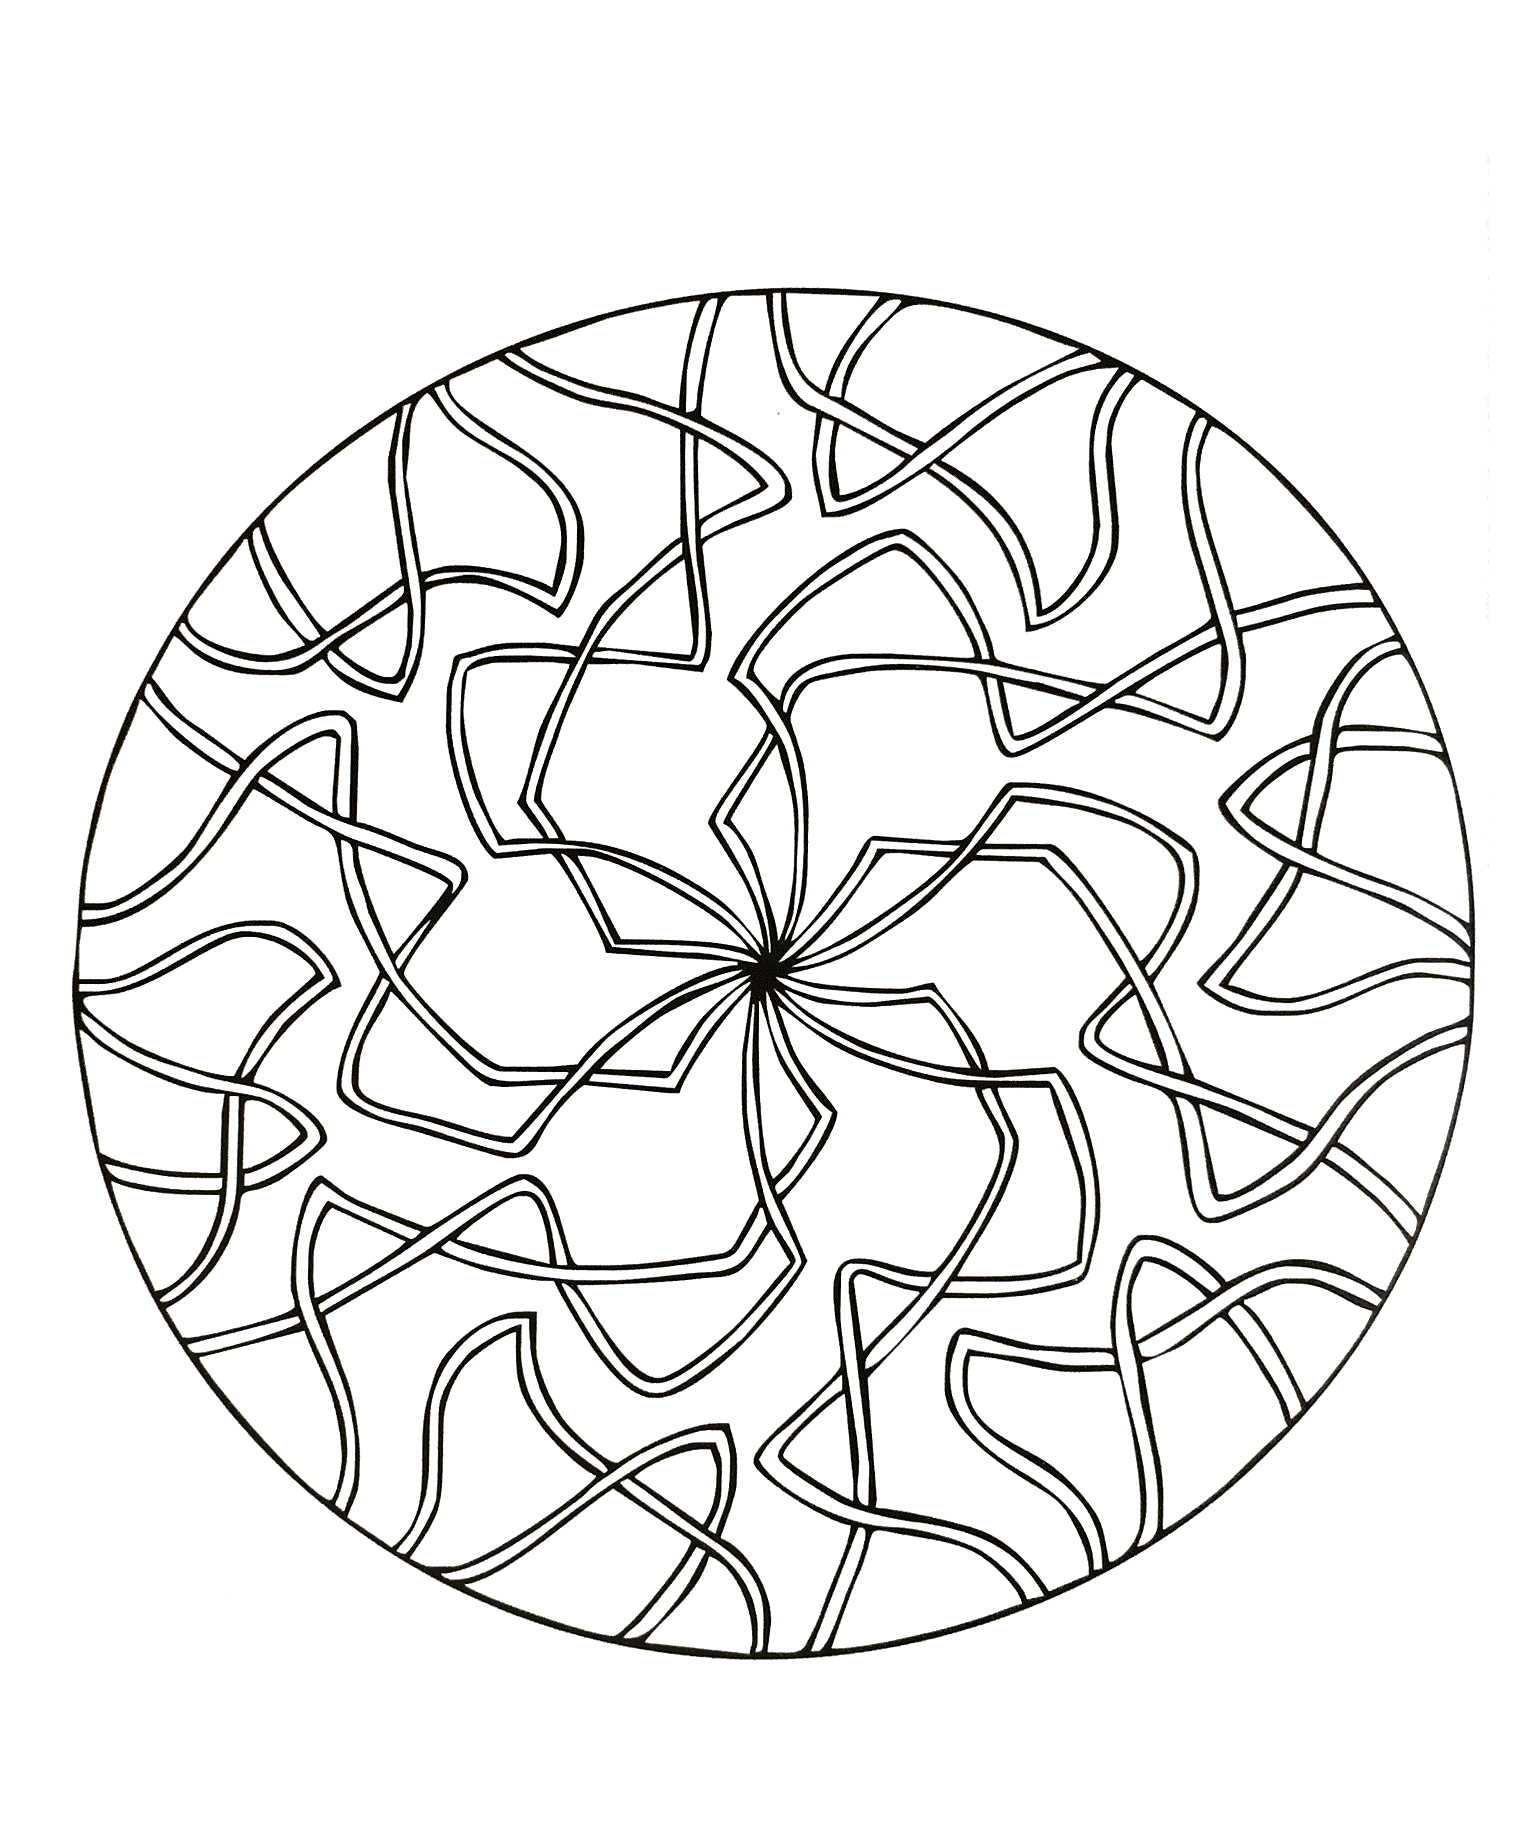 Simple Mandalas coloring page for kids